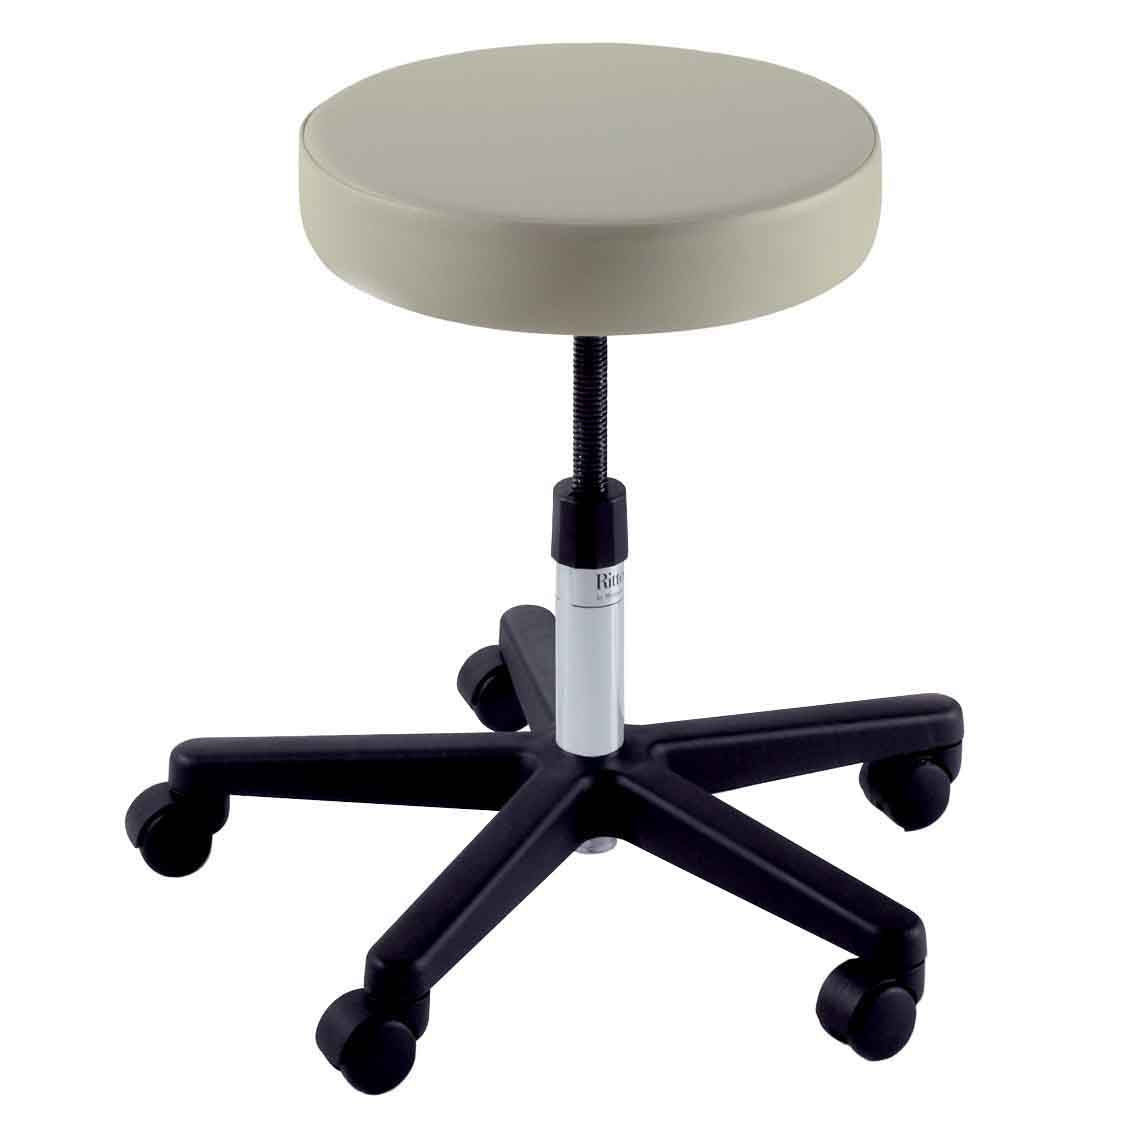 Ritter 270 Adjustable Stool with Soft Rubber Casters